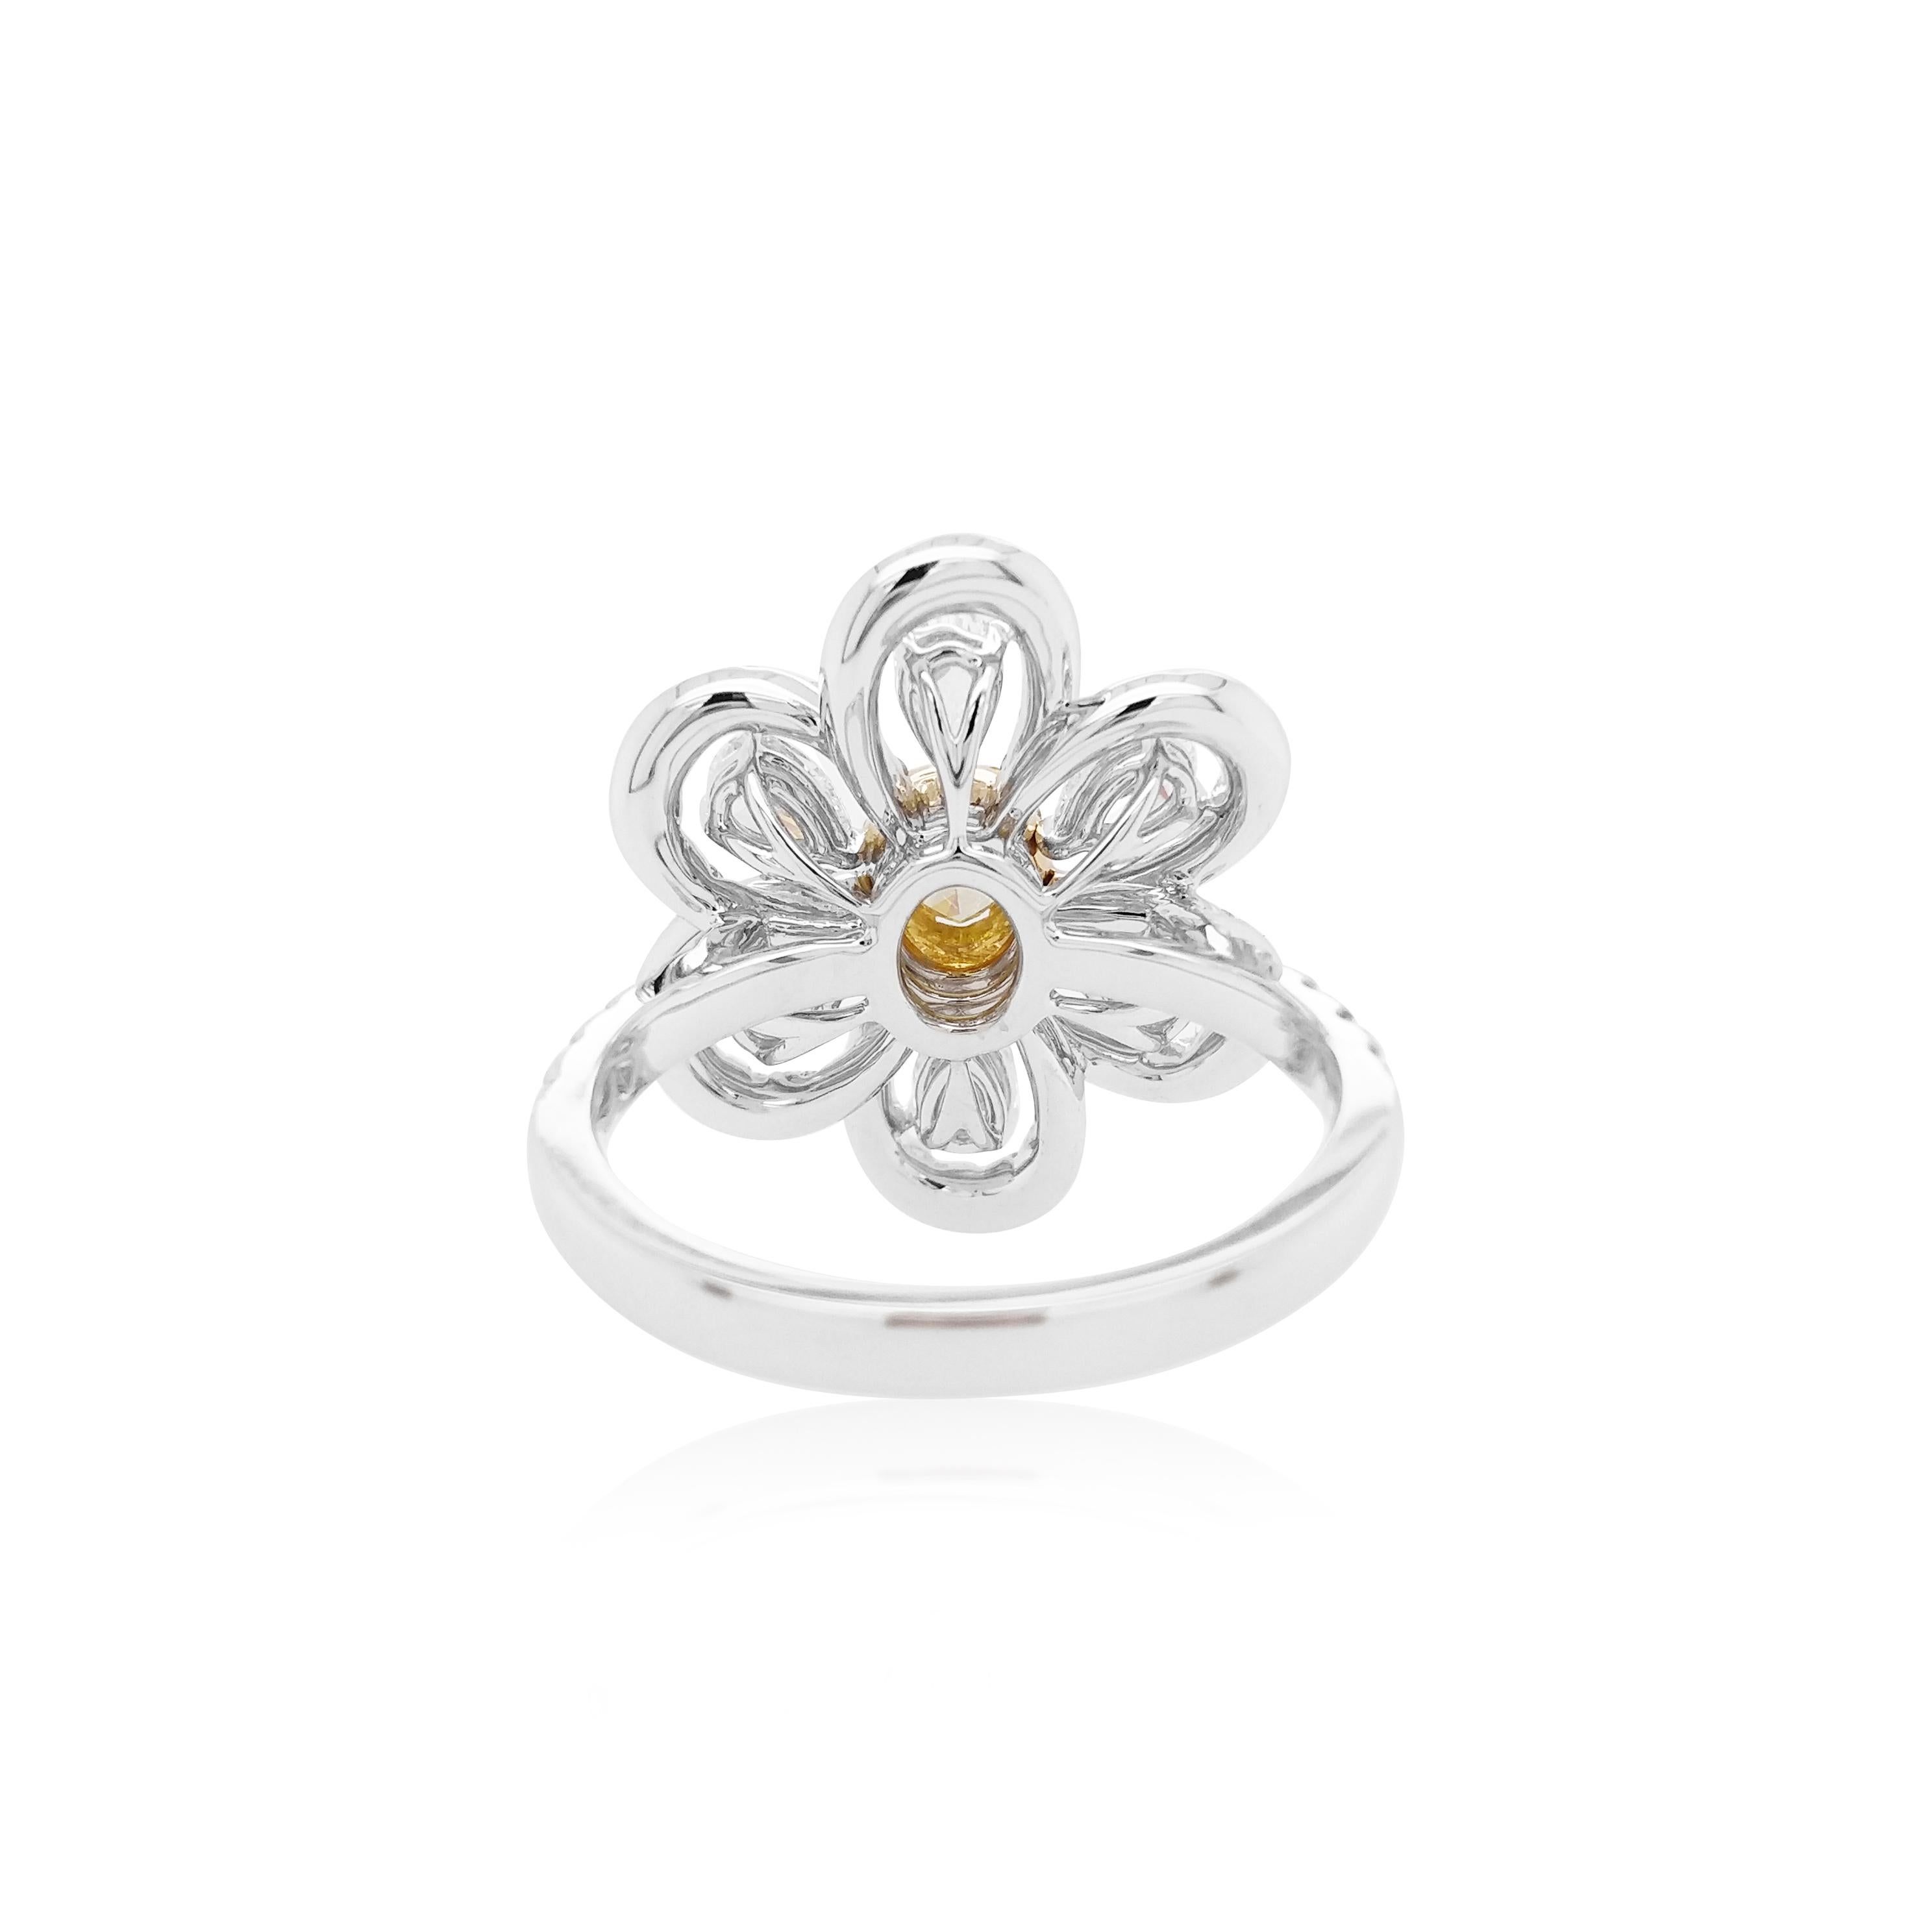 This unique flower-shaped ring features a natural oval-shape Yellow diamond at the heart of their design. The rich colour of these diamonds is complimented perfectly by the delicate 18 Karat white gold and yellow gold floral design which completed